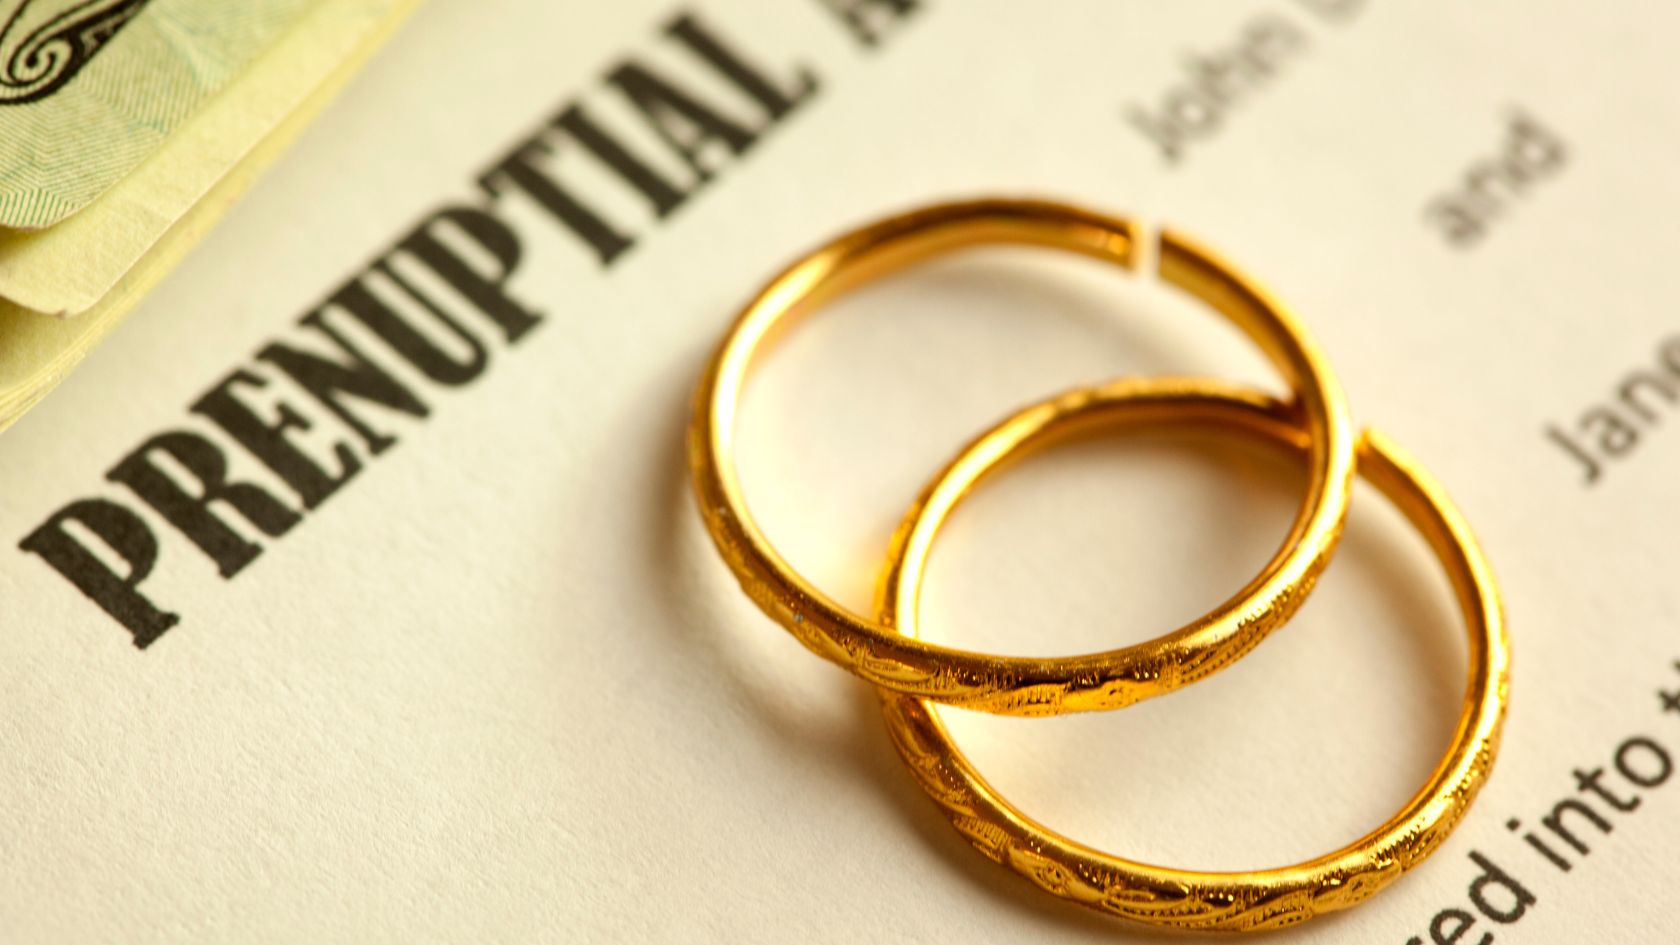 NEW IMPETUS FOR PRENUPTIAL AGREEMENTS : An ounce of prevention is worth a pound of cure.